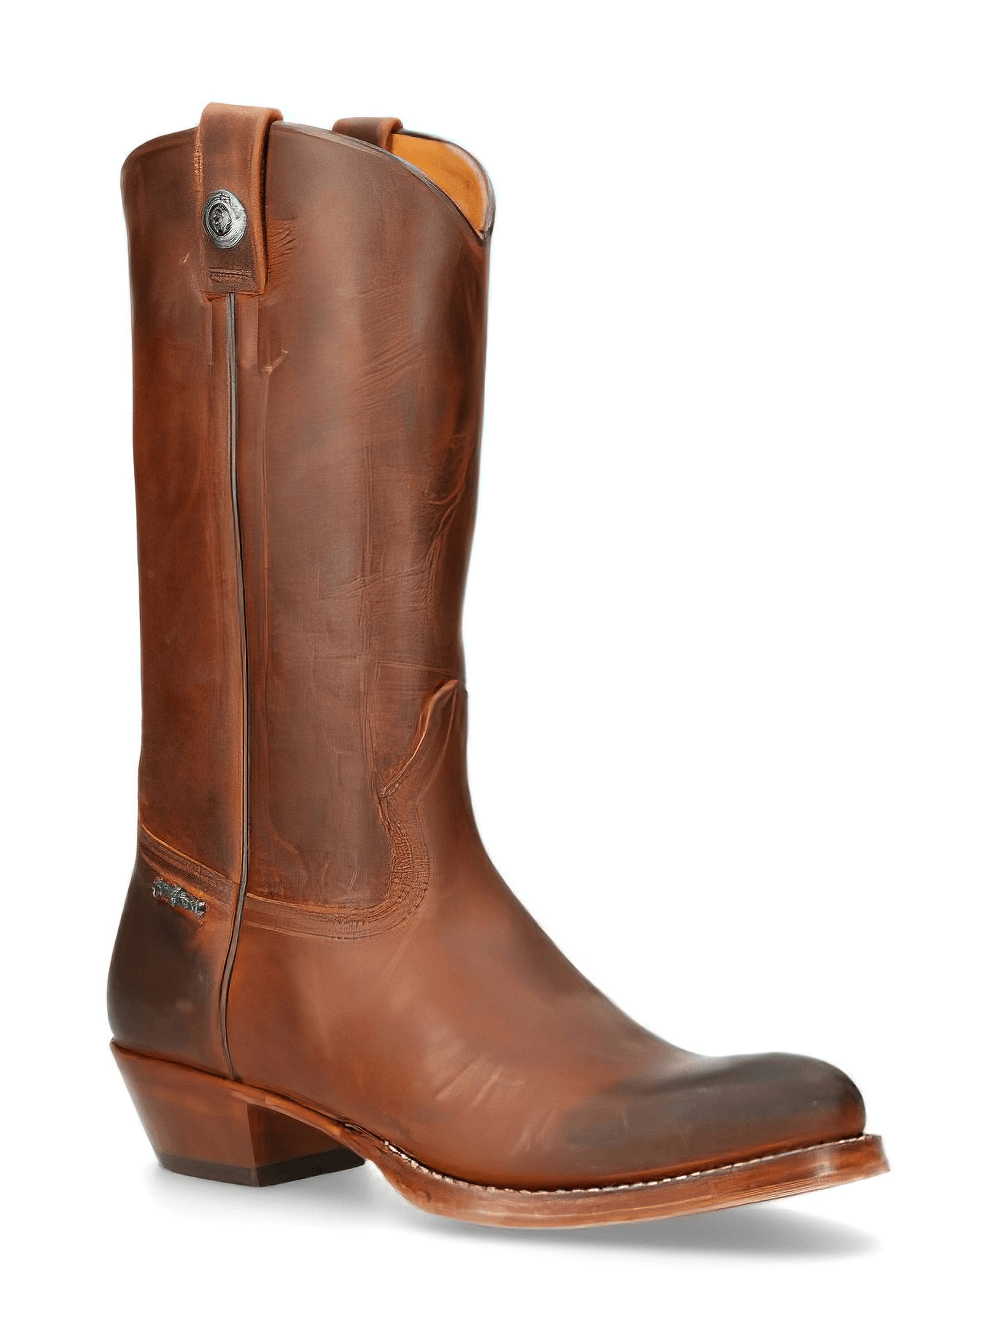 NEW ROCK Brown Leather Cowboy Boots with Zipper